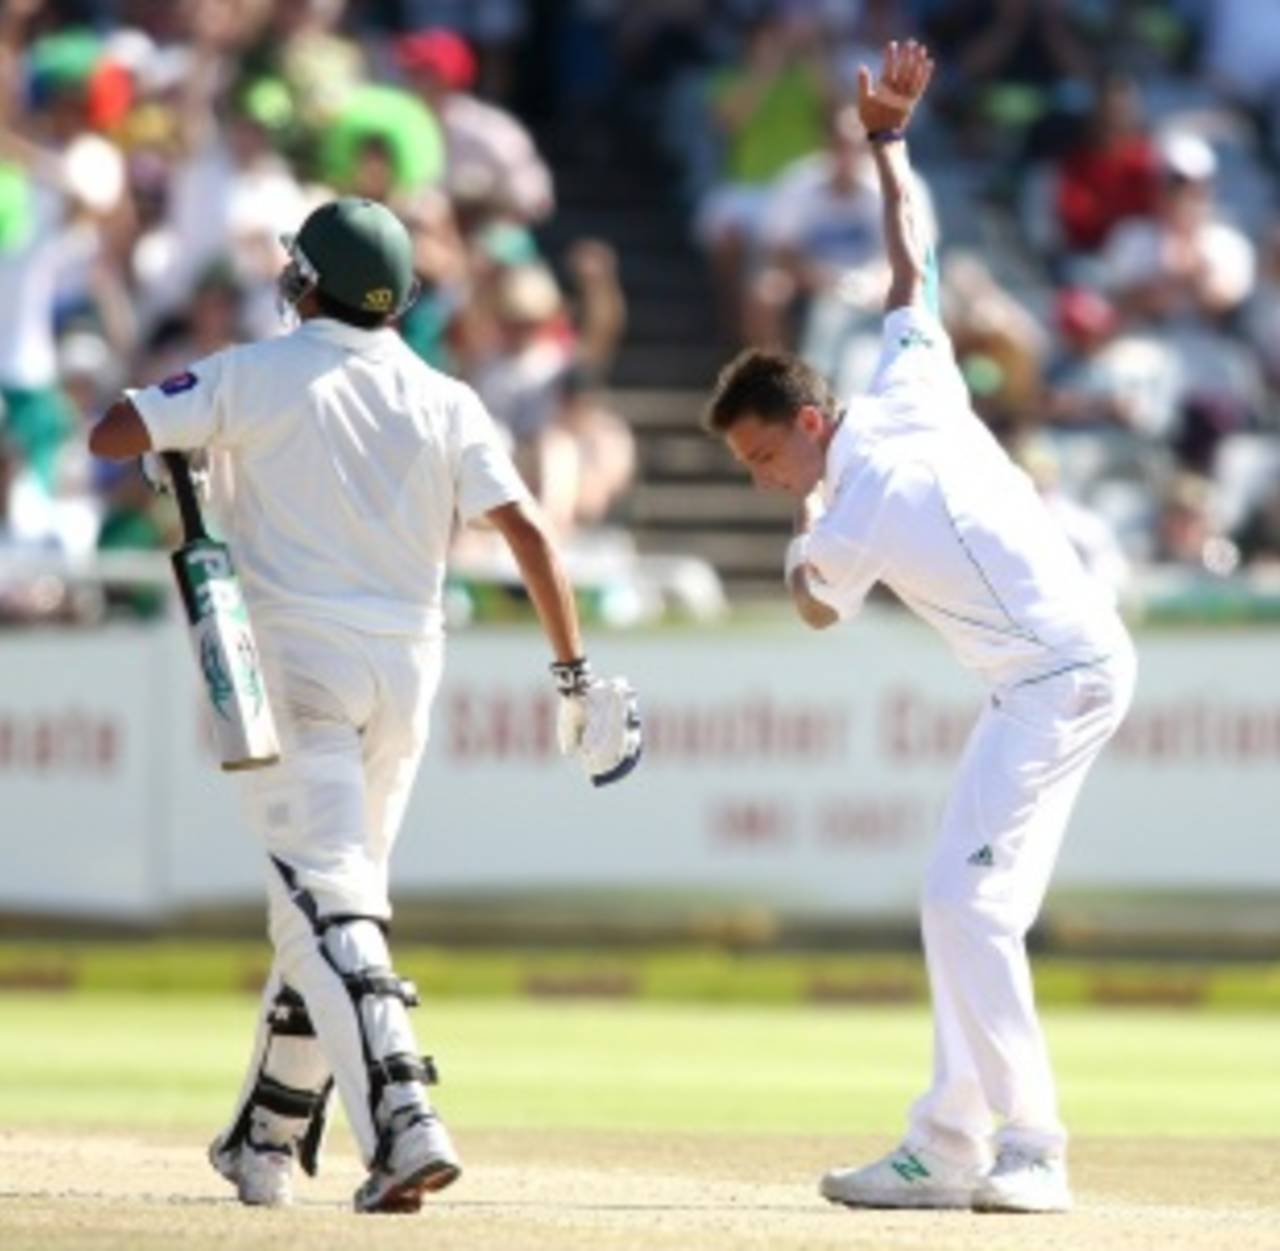 Dale Steyn gestures after dismissing Younis Khan on the third day of the Test&nbsp;&nbsp;&bull;&nbsp;&nbsp;Getty Images